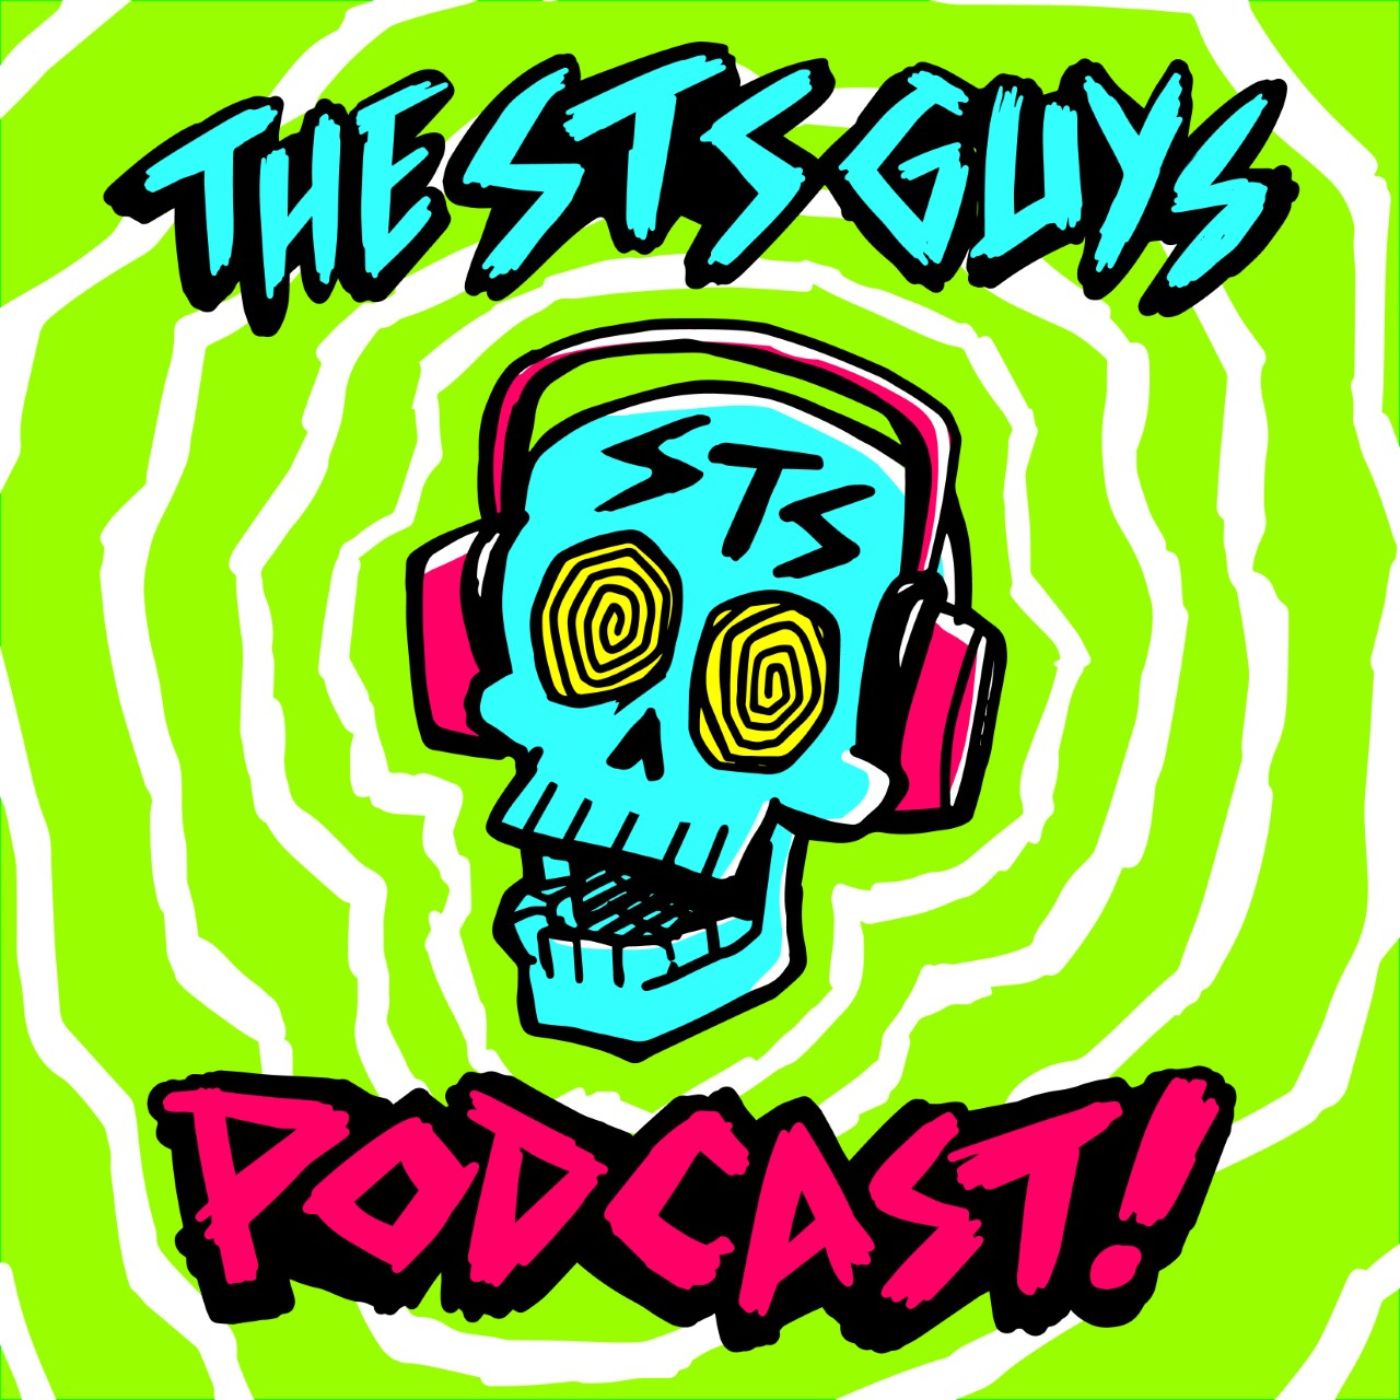 The STS Guys - Episode 23: So That's How It Works